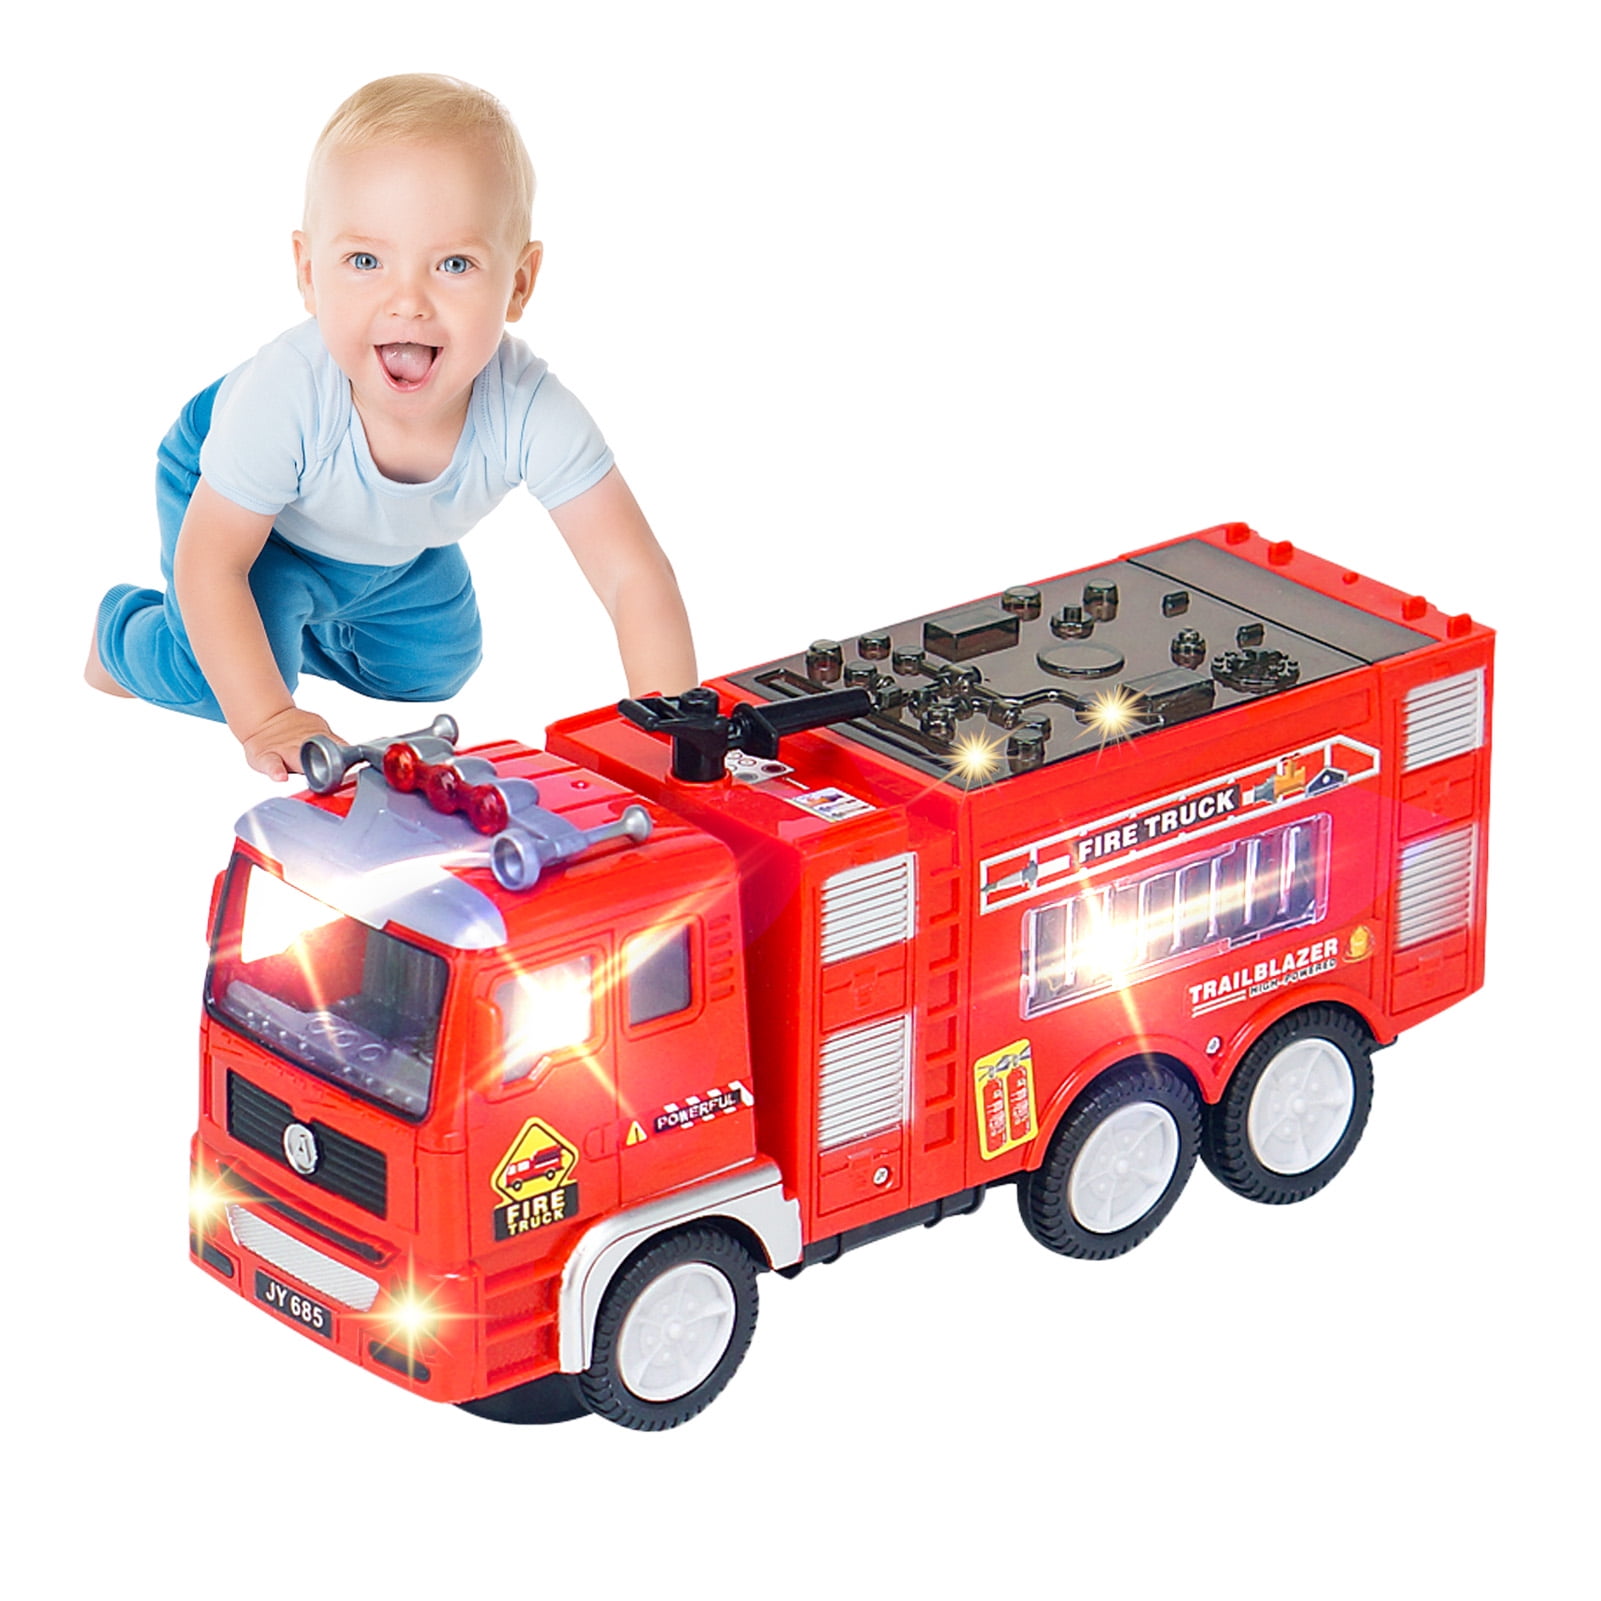 Automatic Steering Rescue Fire Truck Toy with Flashing Lights and Real Siren Sounds Toysery Fire Truck Toy for Kids Battery Operated Automatic Bump & Go Car Emergency Fire Engine Toy Truck